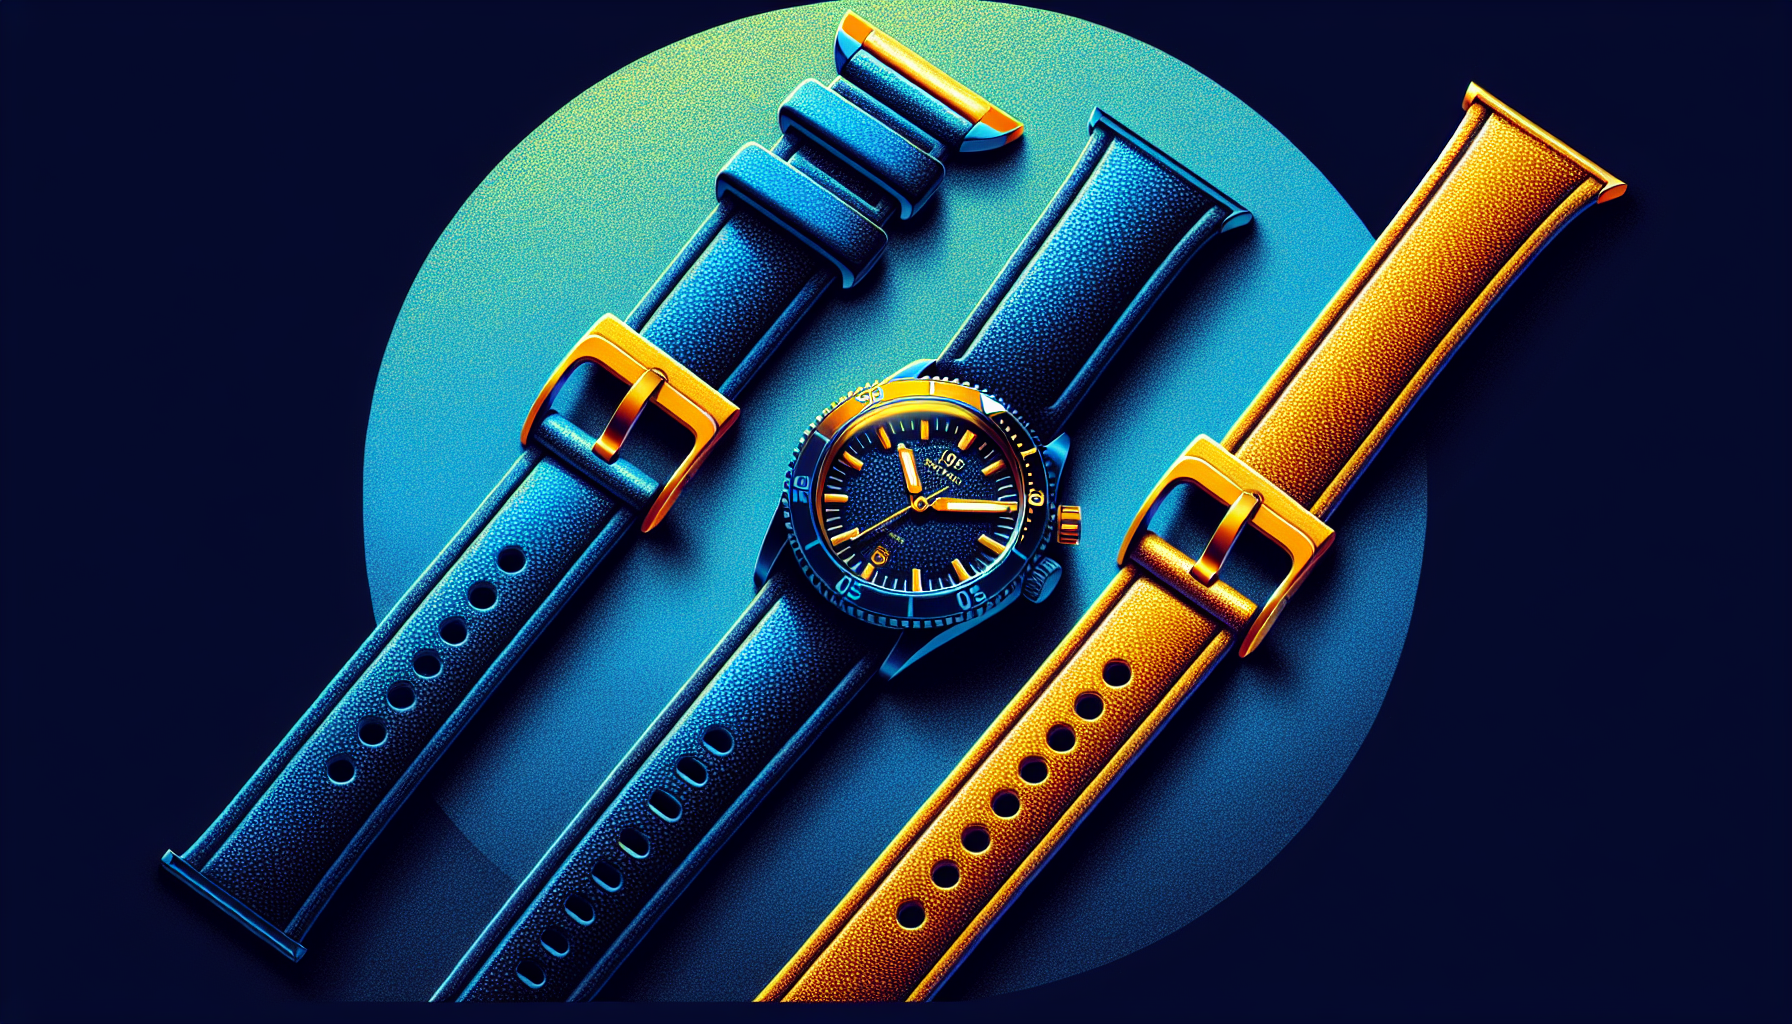 Blue and gold watch straps